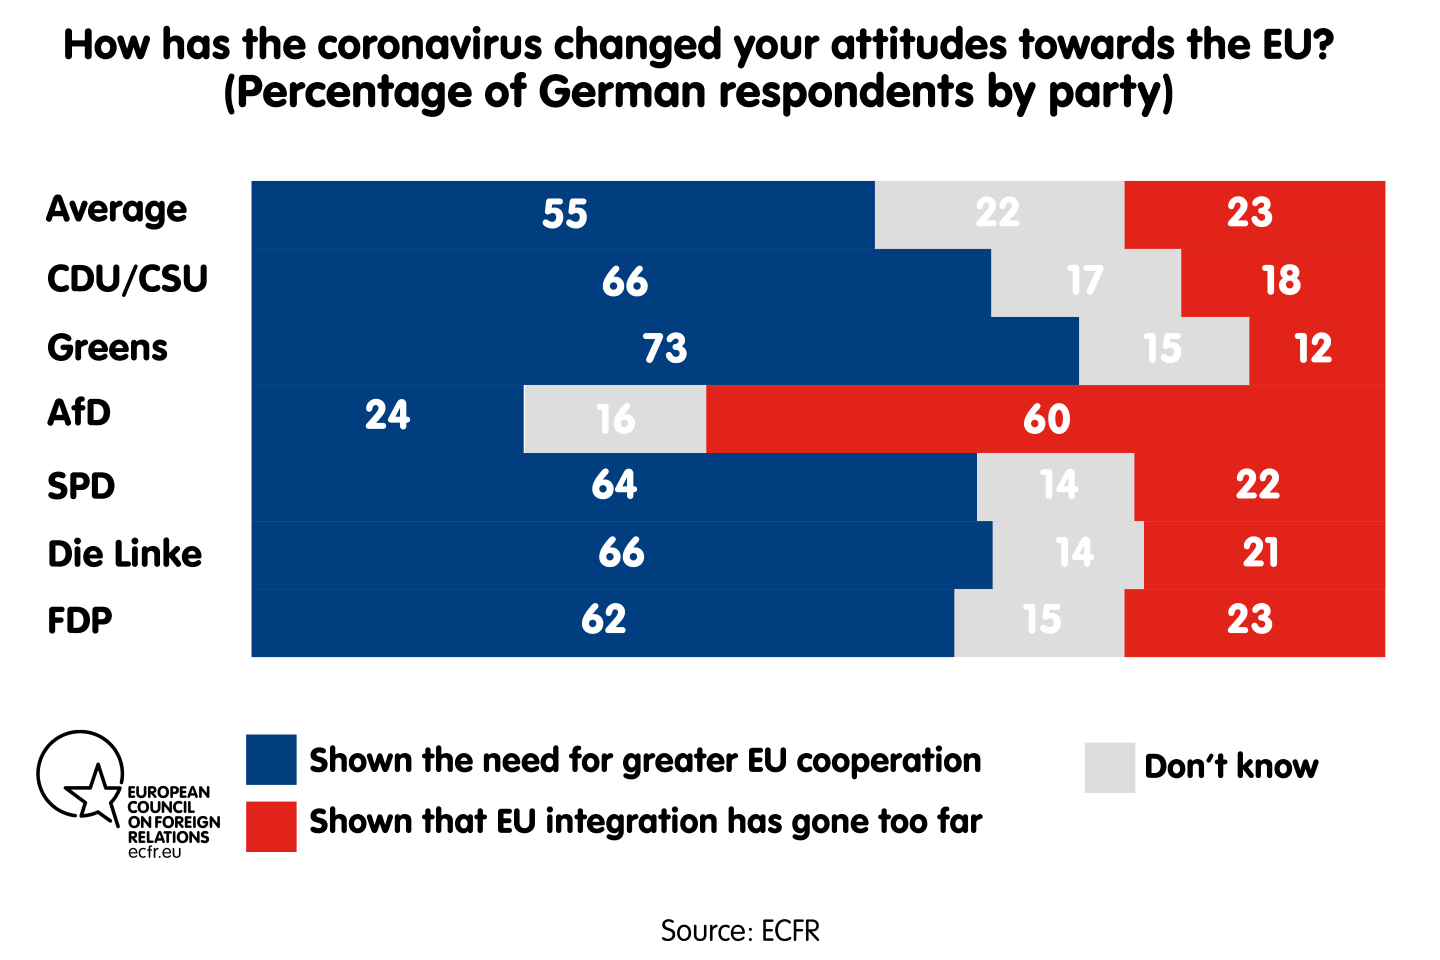 How has the coronavirus changed your attitudes towards the EU? By party